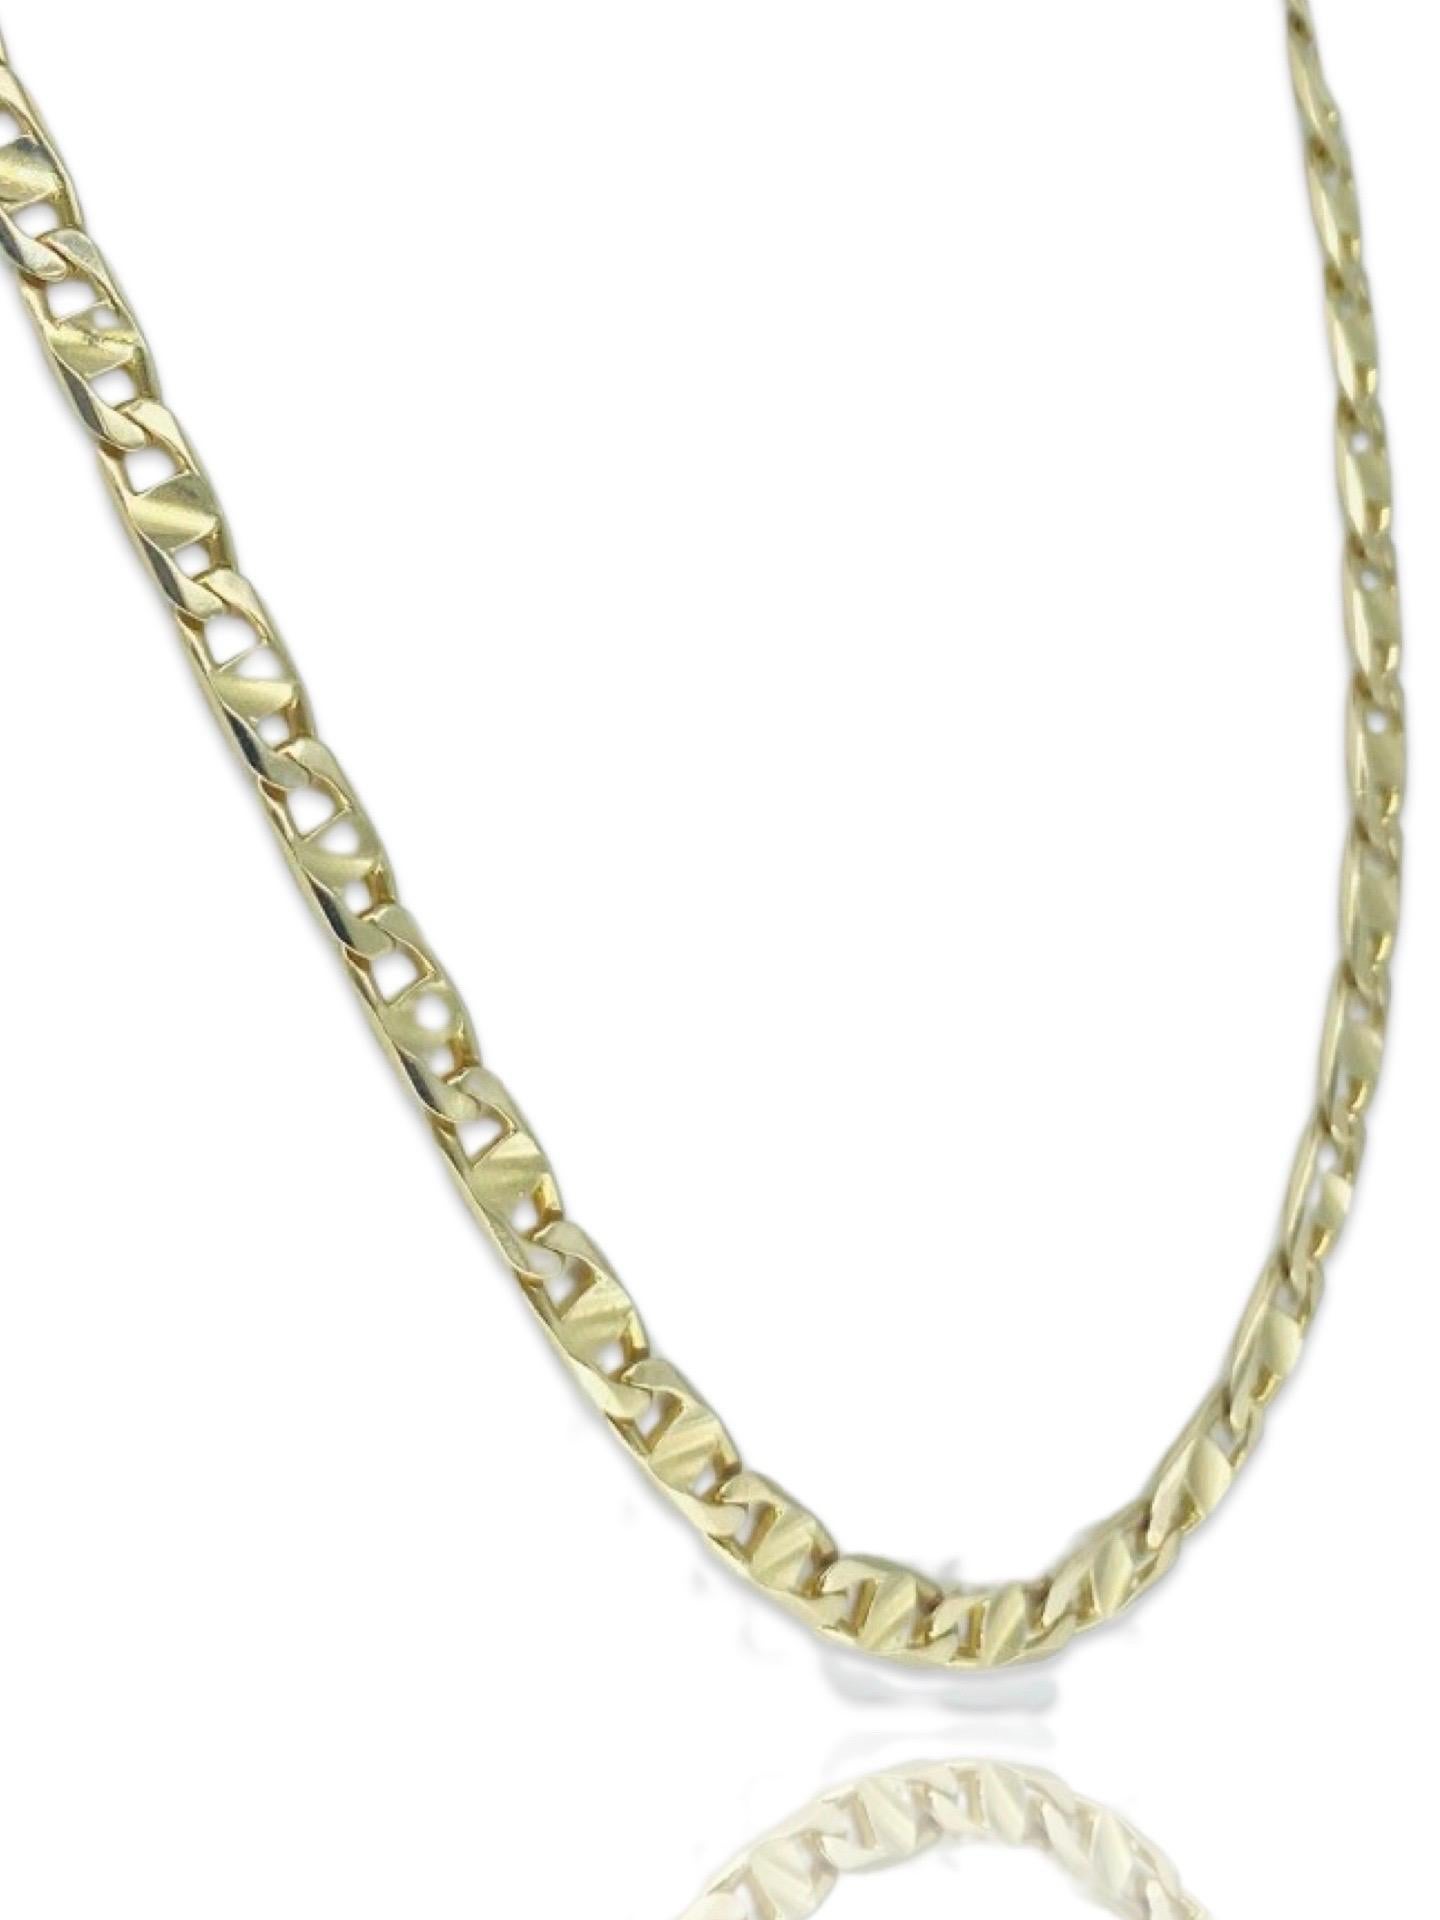 Designer Men’s 5mm Fancy Mariner Link Chain Necklace 14k Gold. The chain weights 25.3g and measures 18.5 inches in length. Marked Tissor (designer) Made in Italy.
